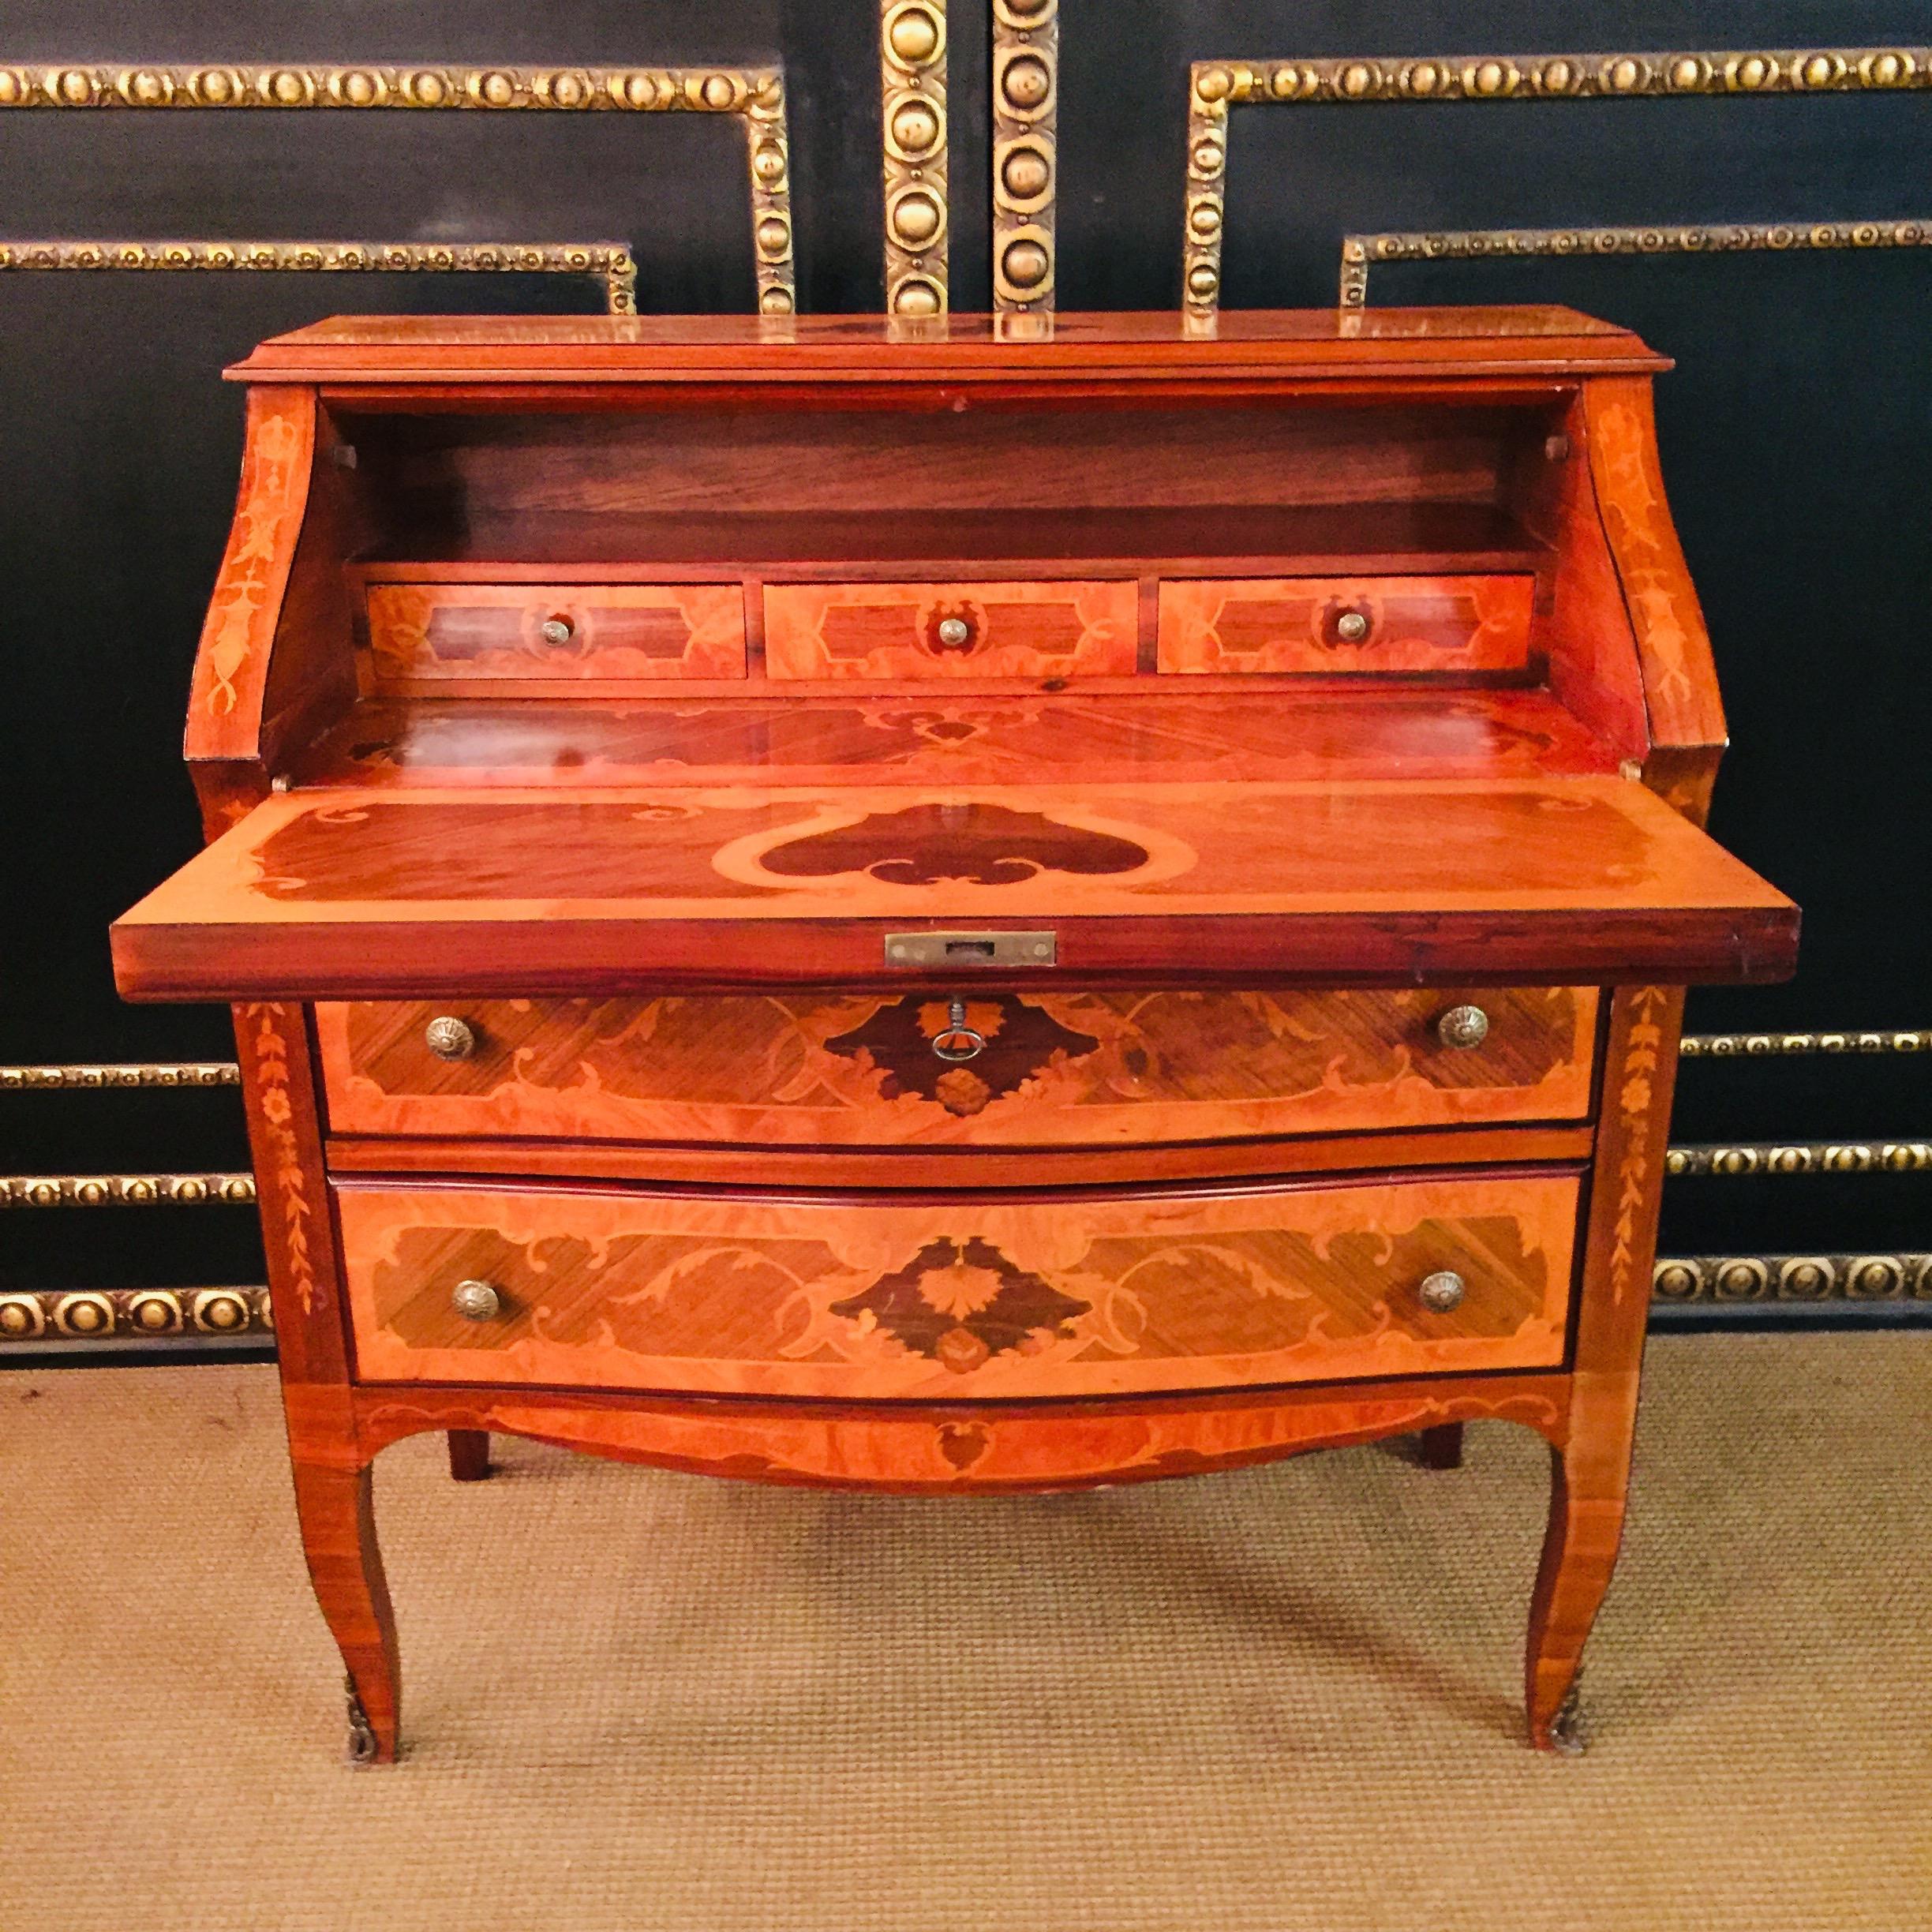 Secretaire Baroque style made in Italy with Inlays.
3 drawers above a plate to open as a writing surface,
There are 3 small drawers behind the plate.

Dimensions.
Width: 90cm
Height: 96cm
Depth:41cm
Height to the writing surface 74cm.